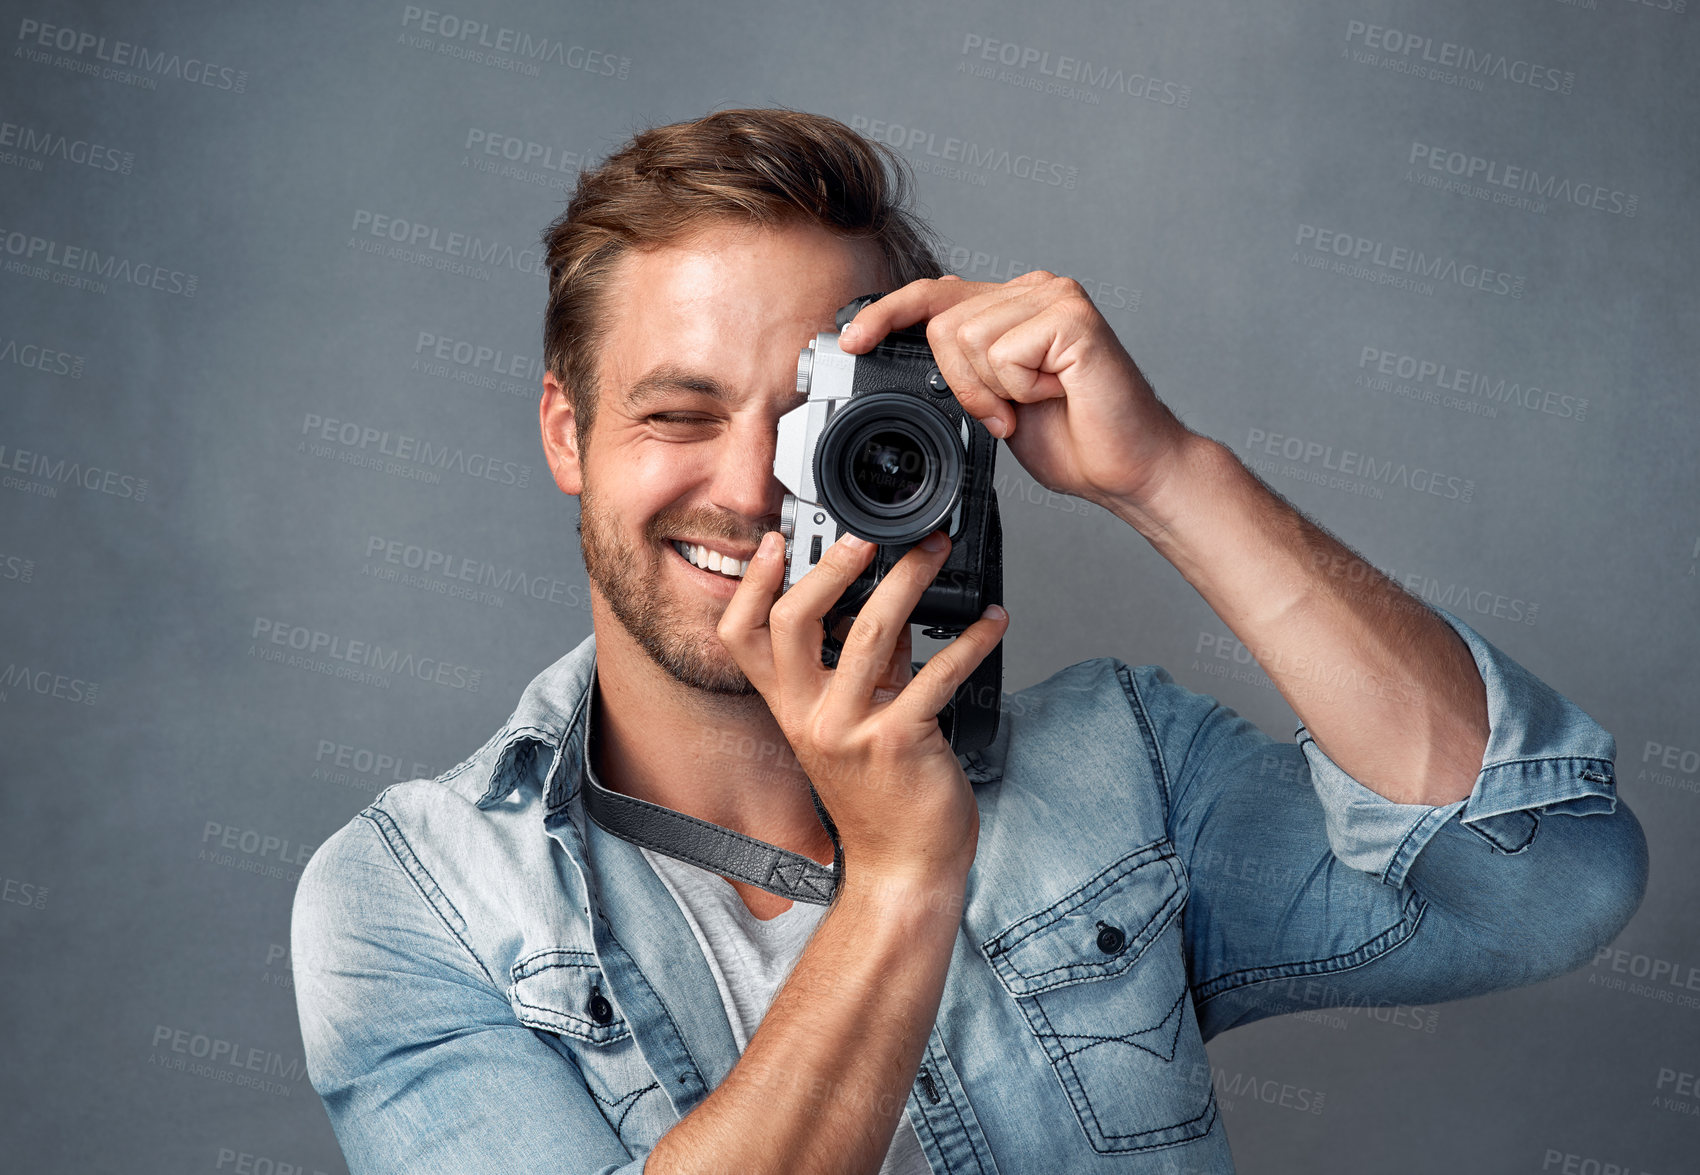 Buy stock photo Portrait of a happy young man holding up a camera while posing against a gray background in the studio